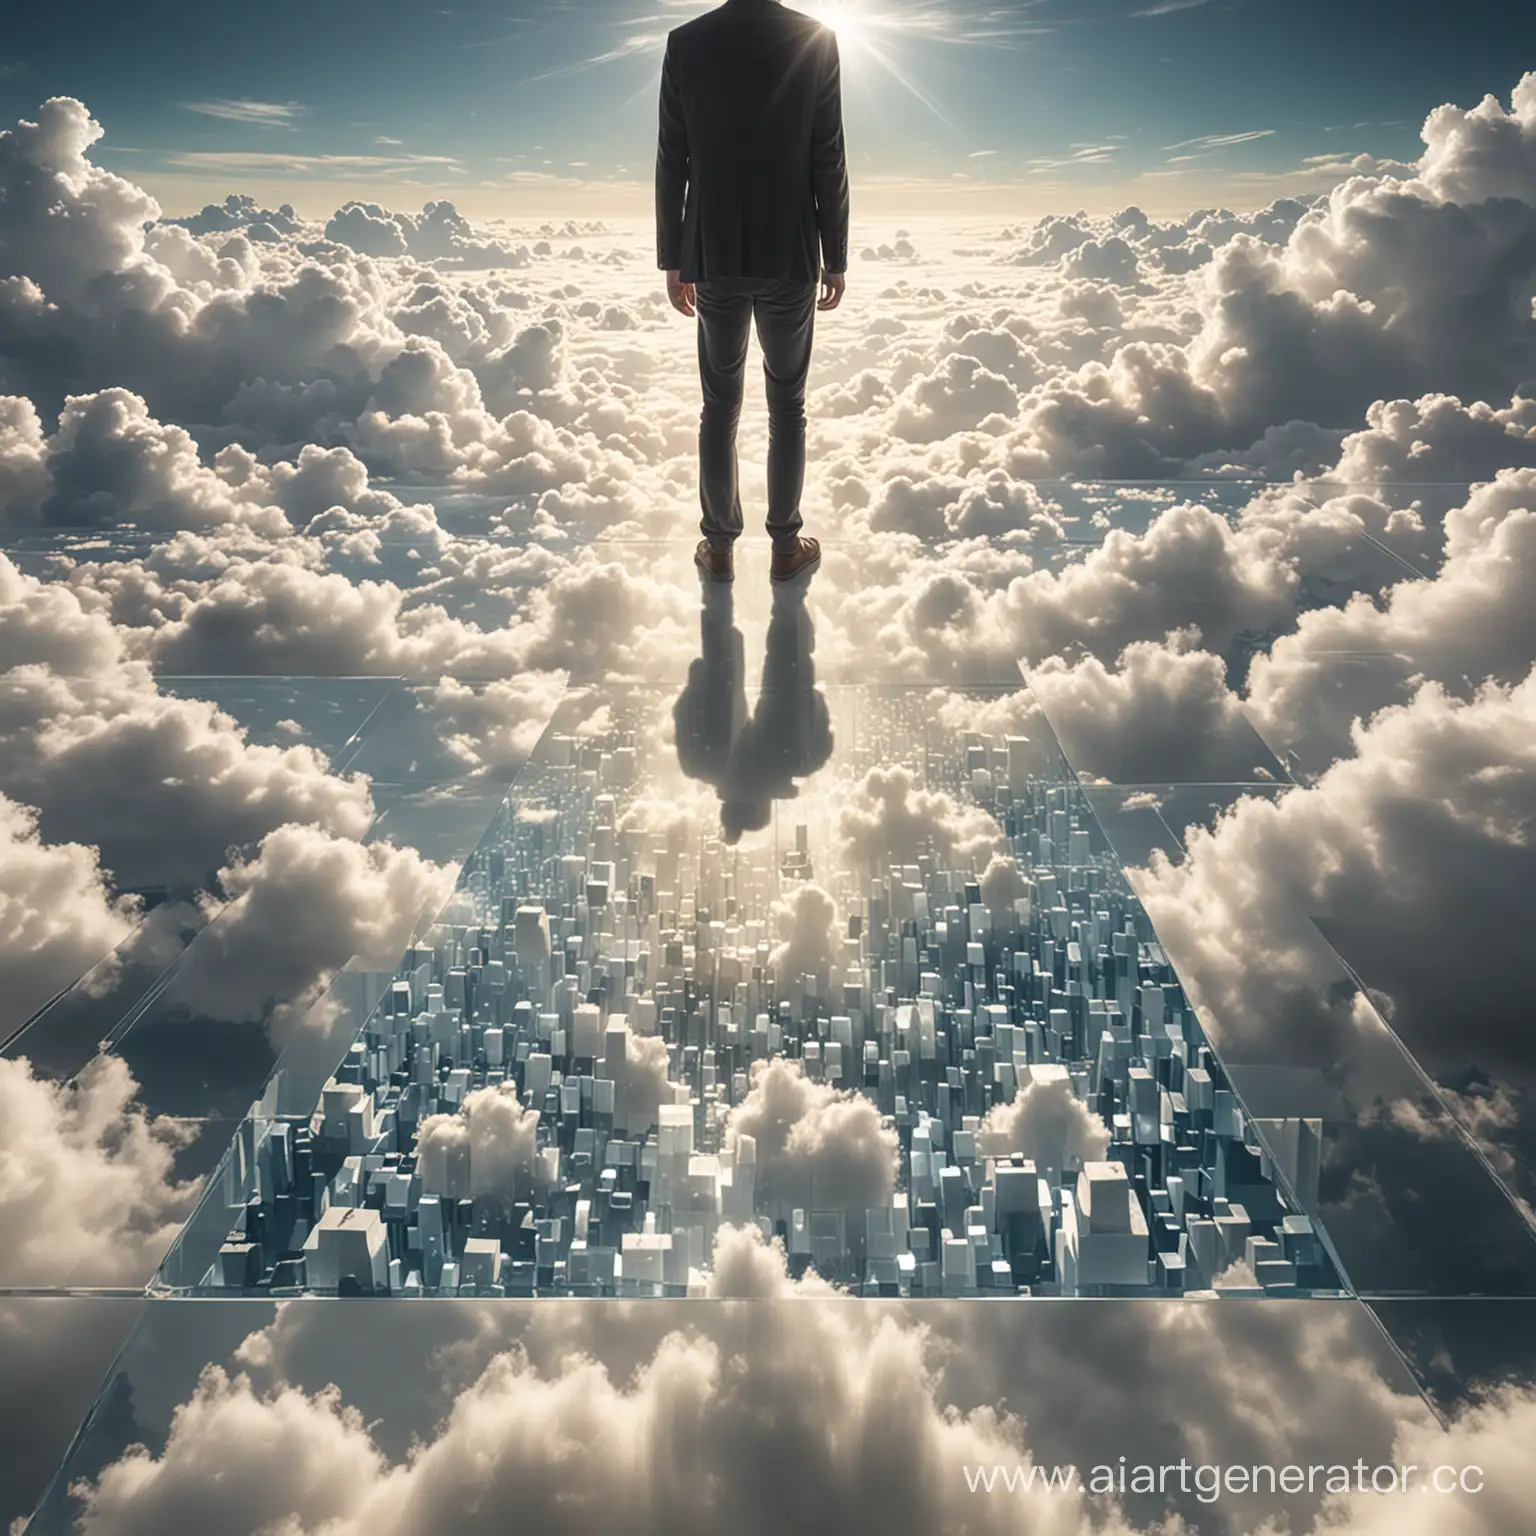 Person-on-Transparent-Surface-Overlooking-Infinity-of-Light-with-Cubic-Clouds-Beneath